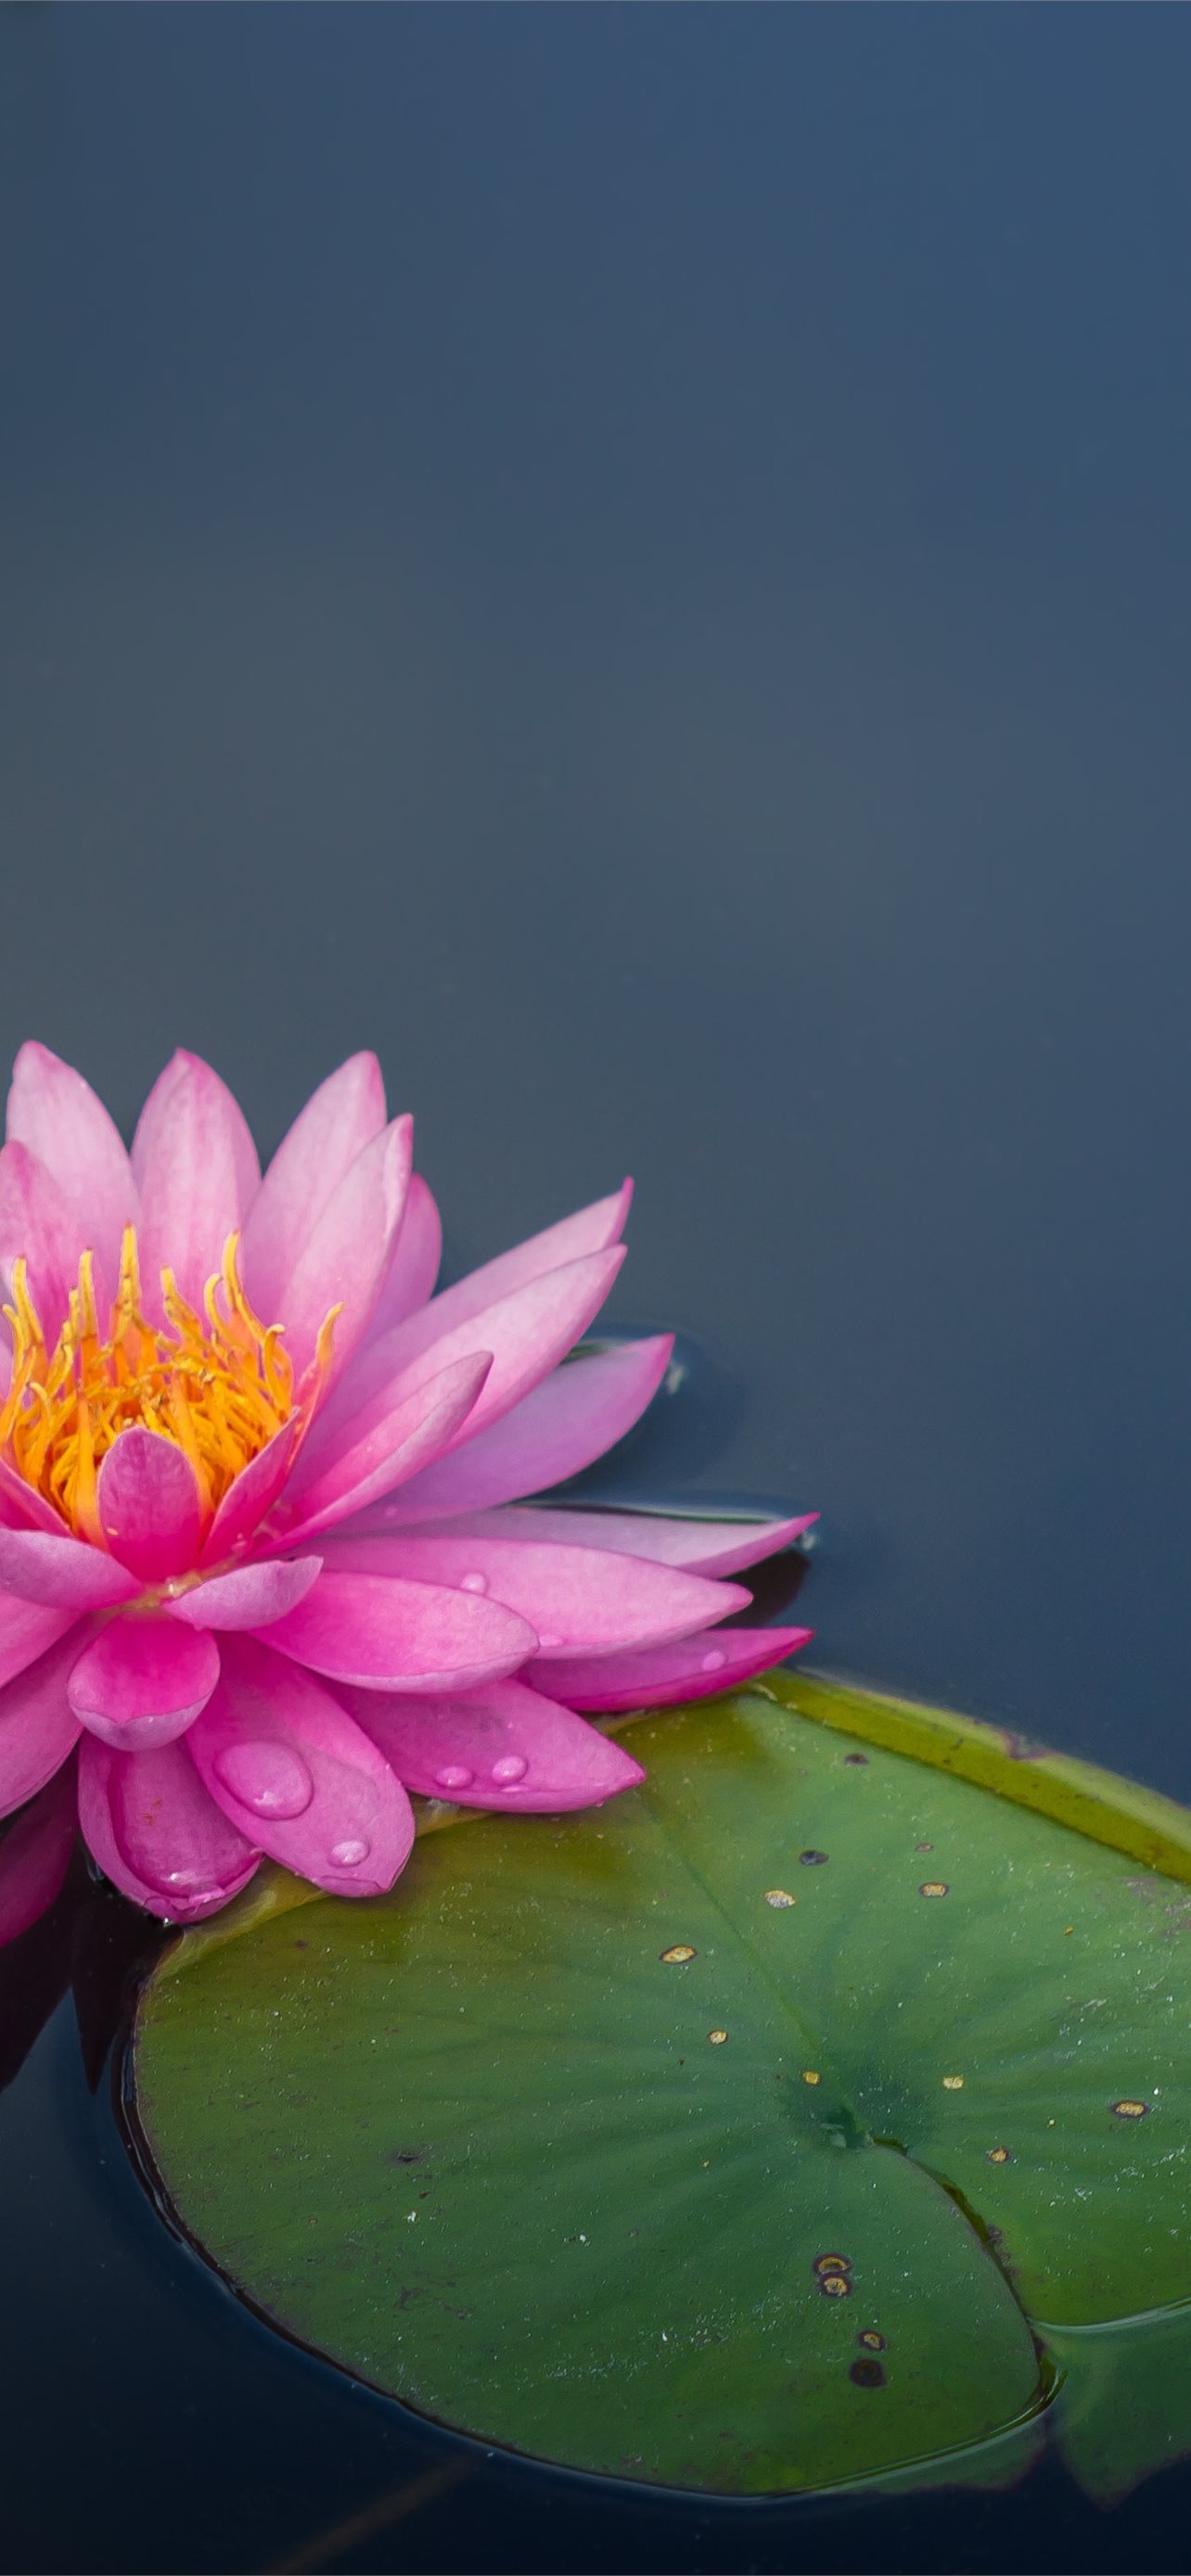 Download wallpaper 800x1200 lotus flower leaves petals iphone 4s4 for  parallax hd background